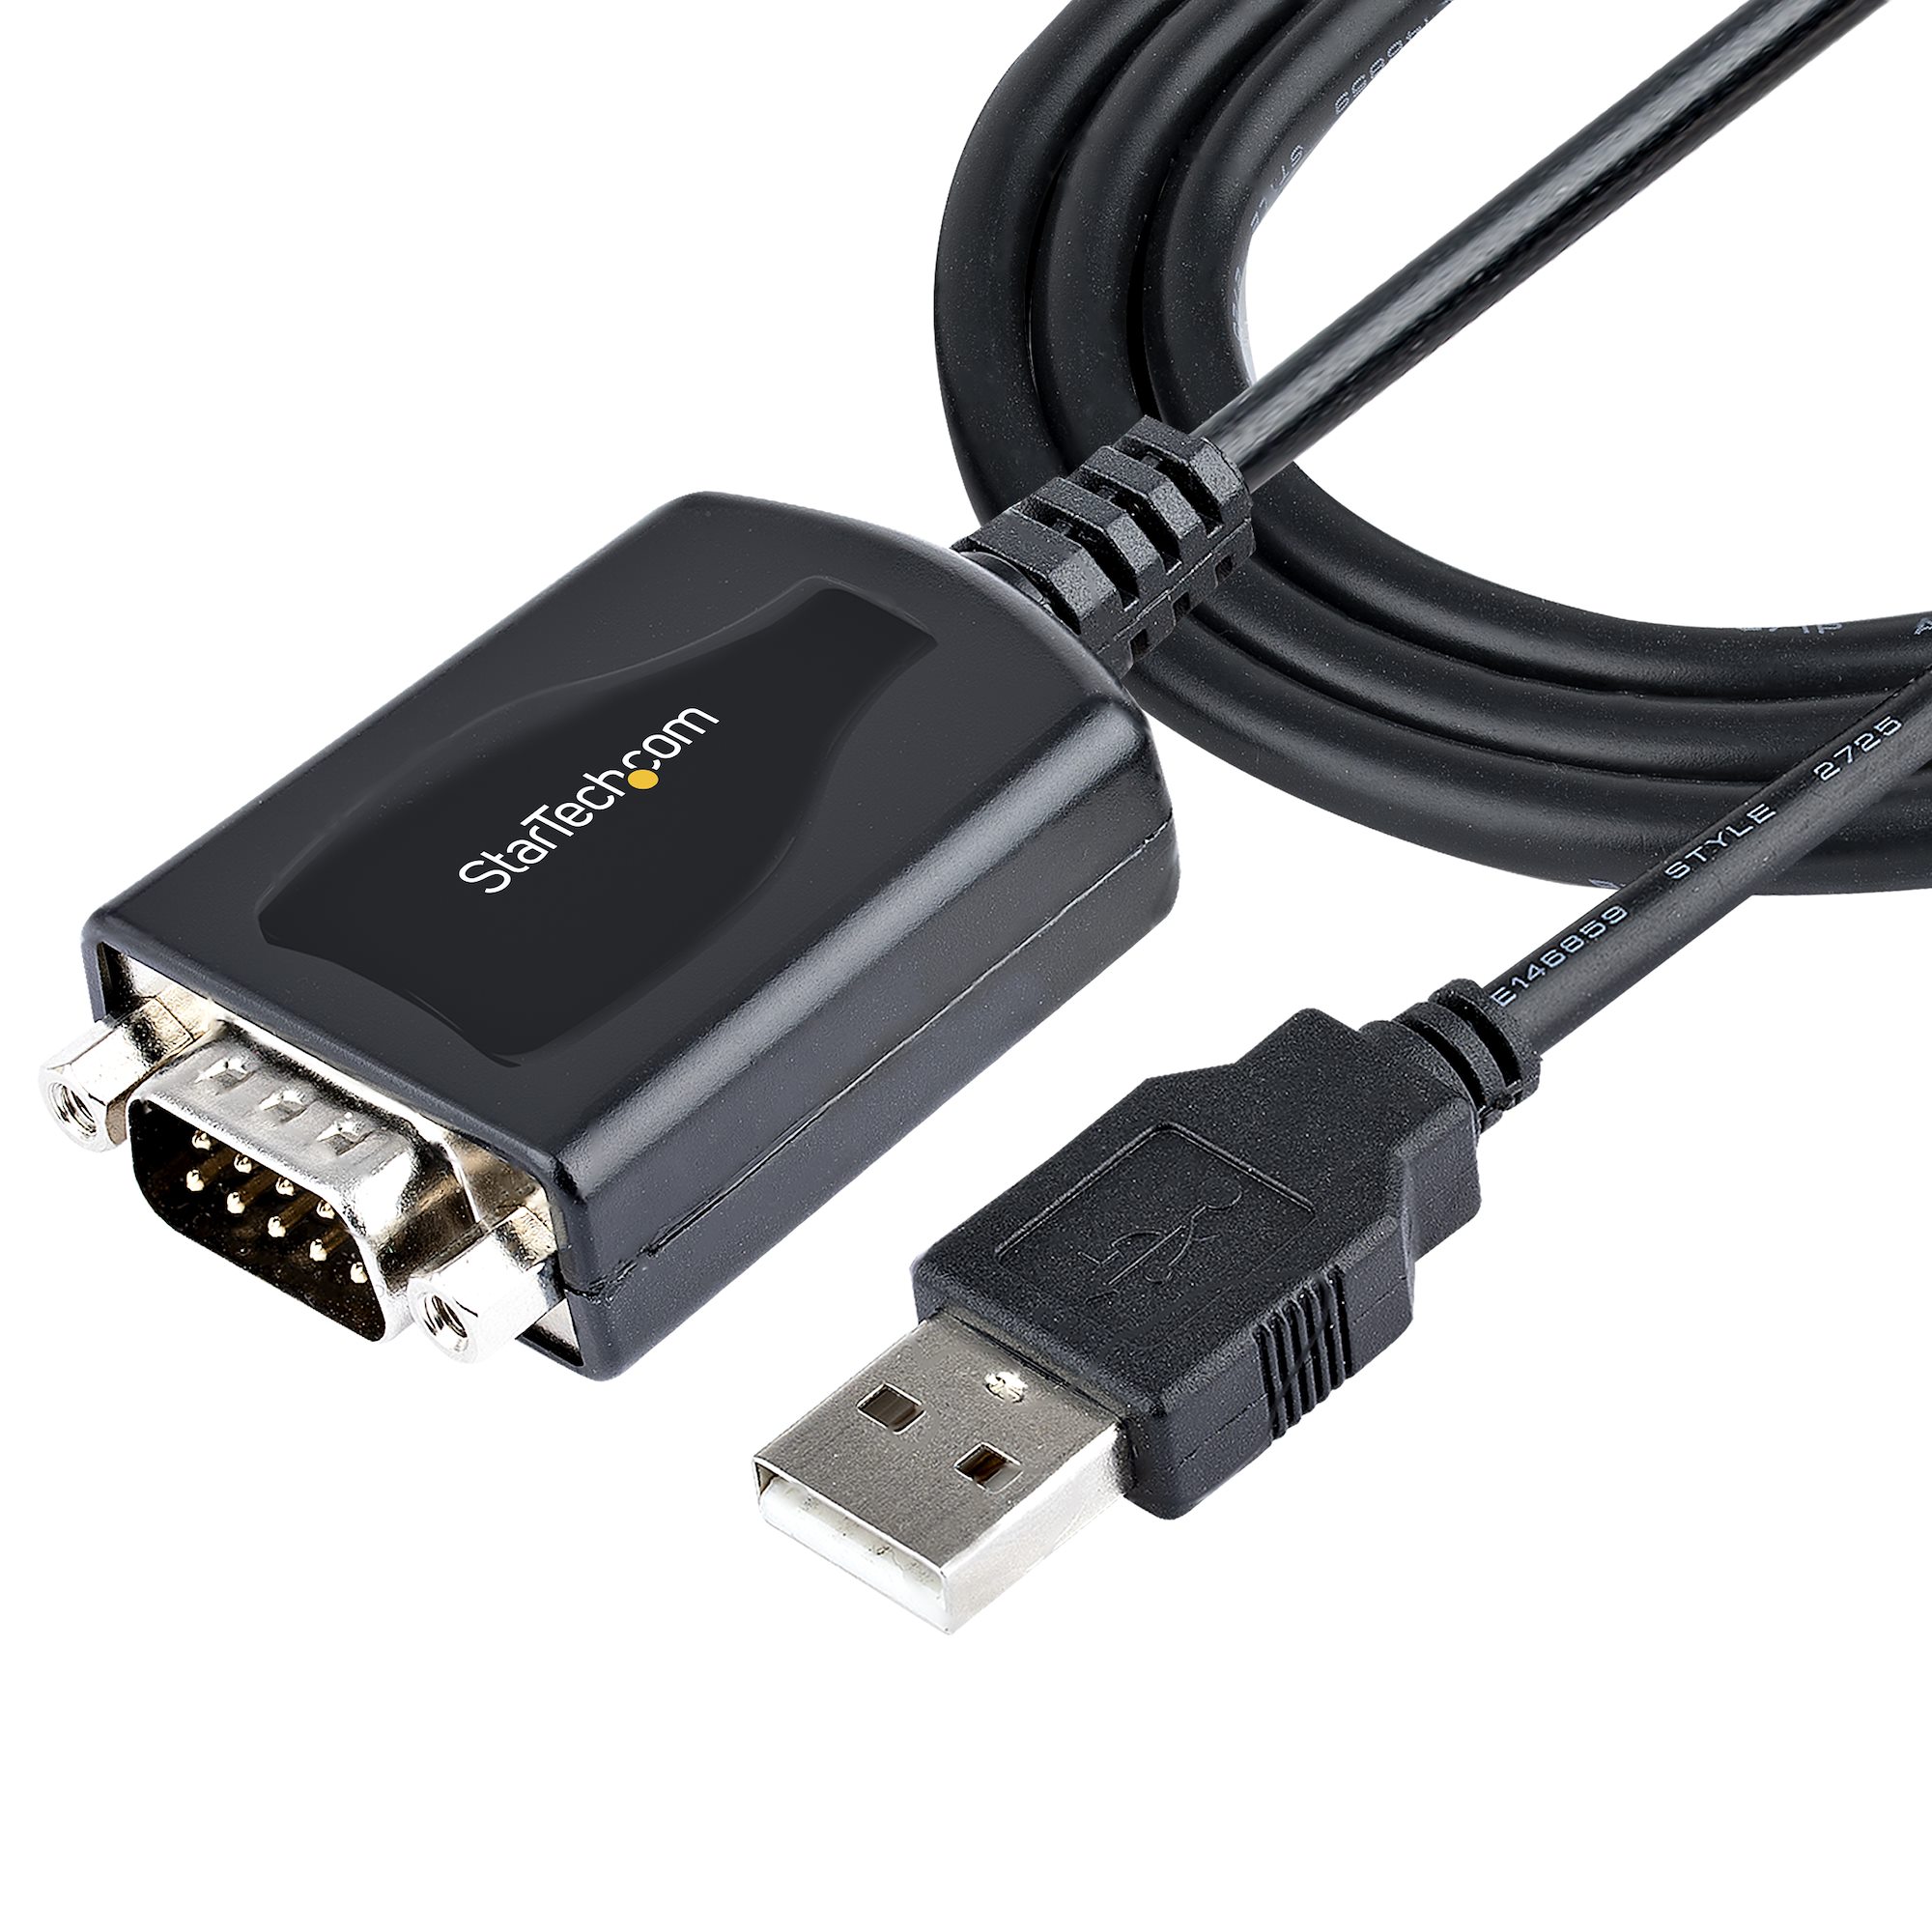 【1P3FPC-USB-SERIAL】3FT USB TO SERIAL CABLE, USB TO